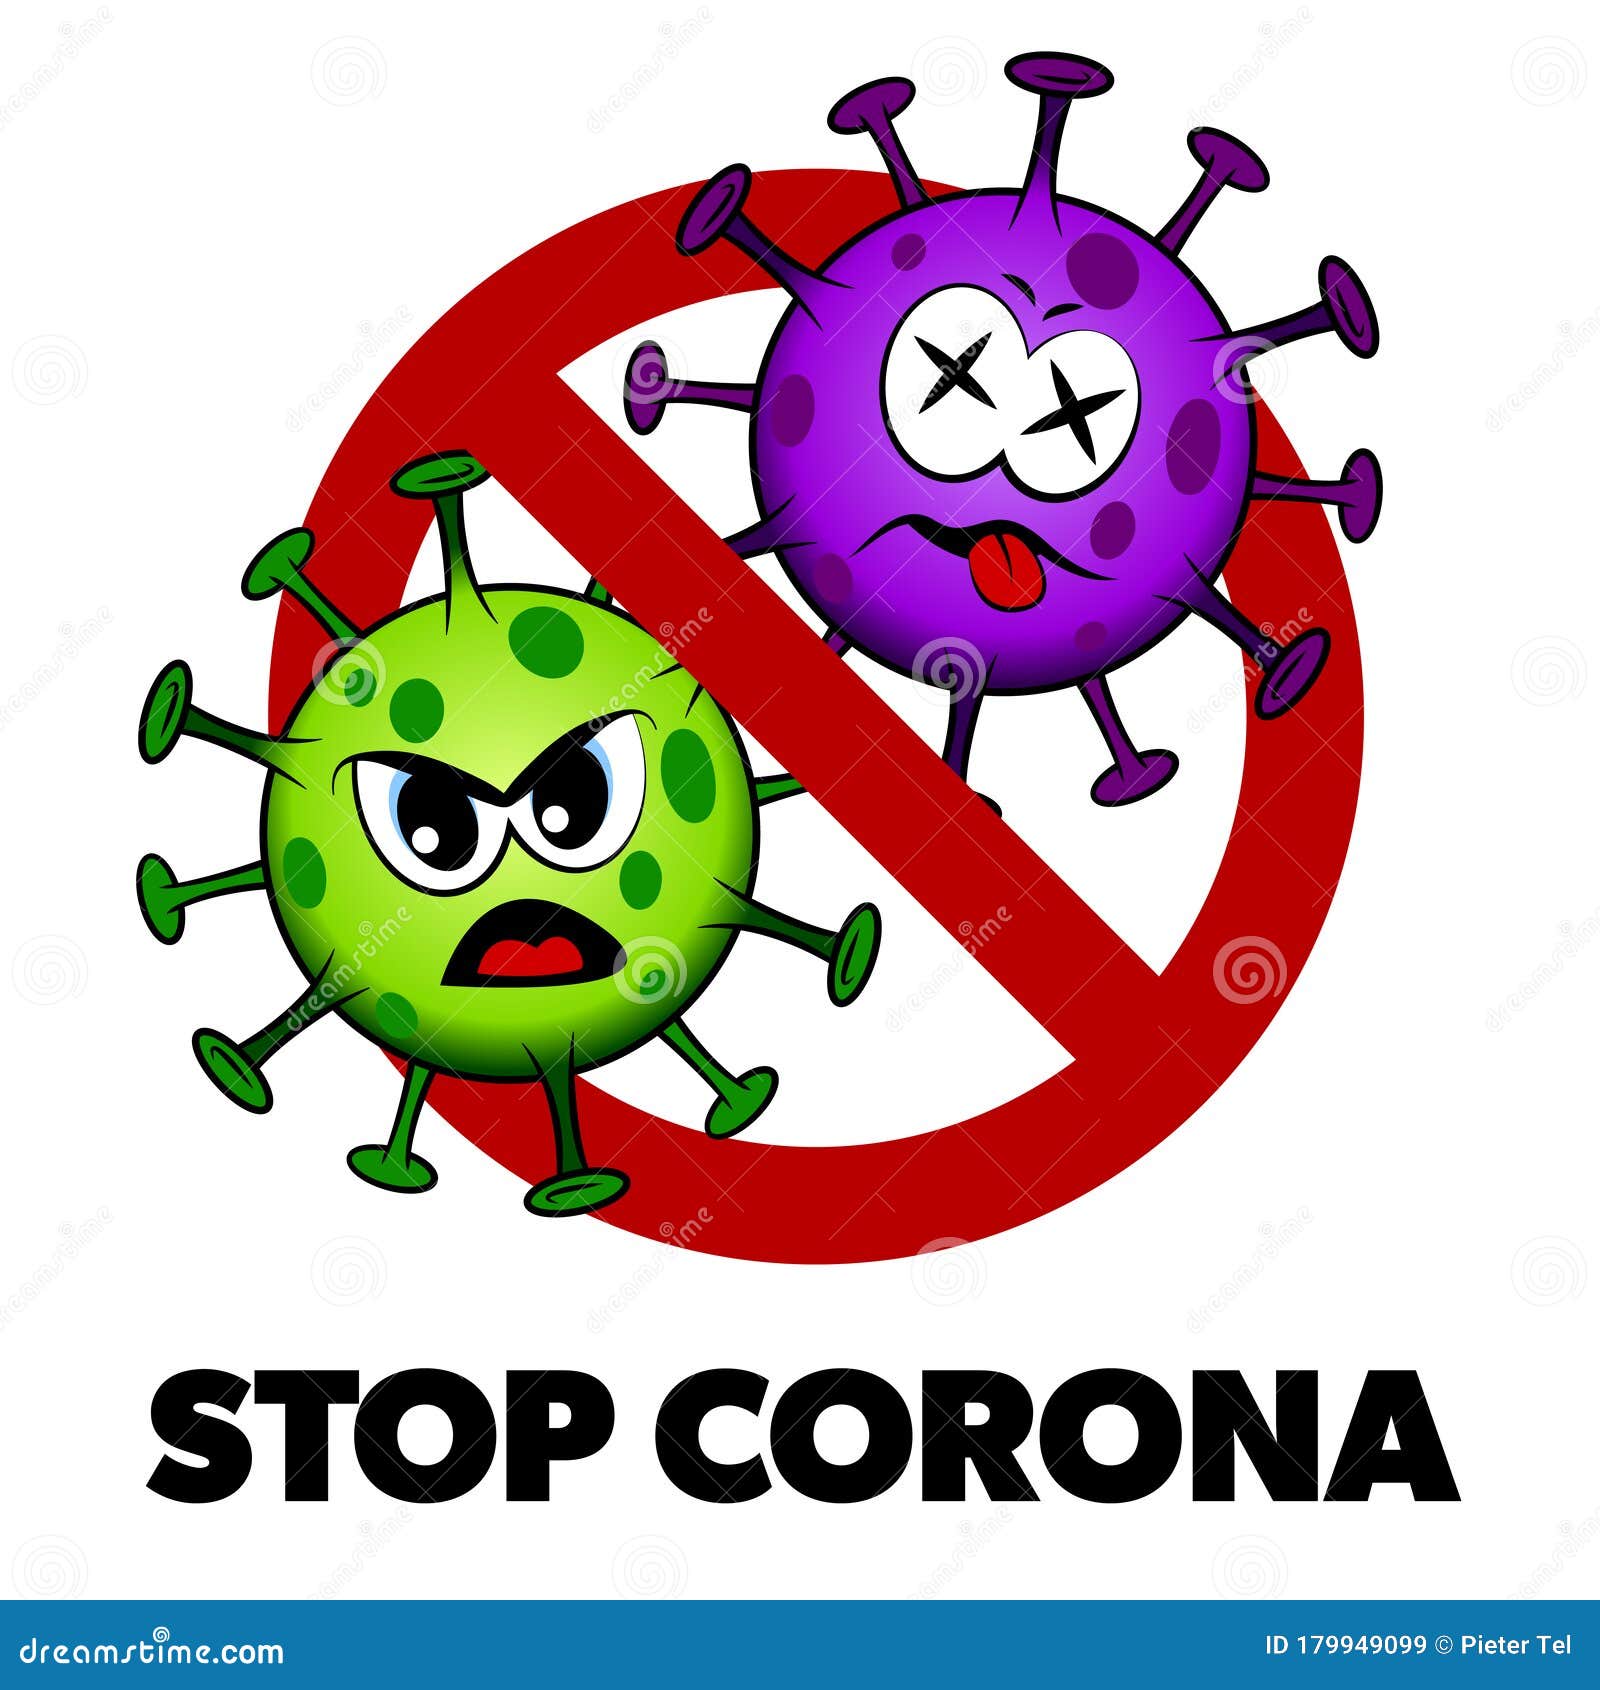 stop corona cartoon style sign, angry and dead covid-19